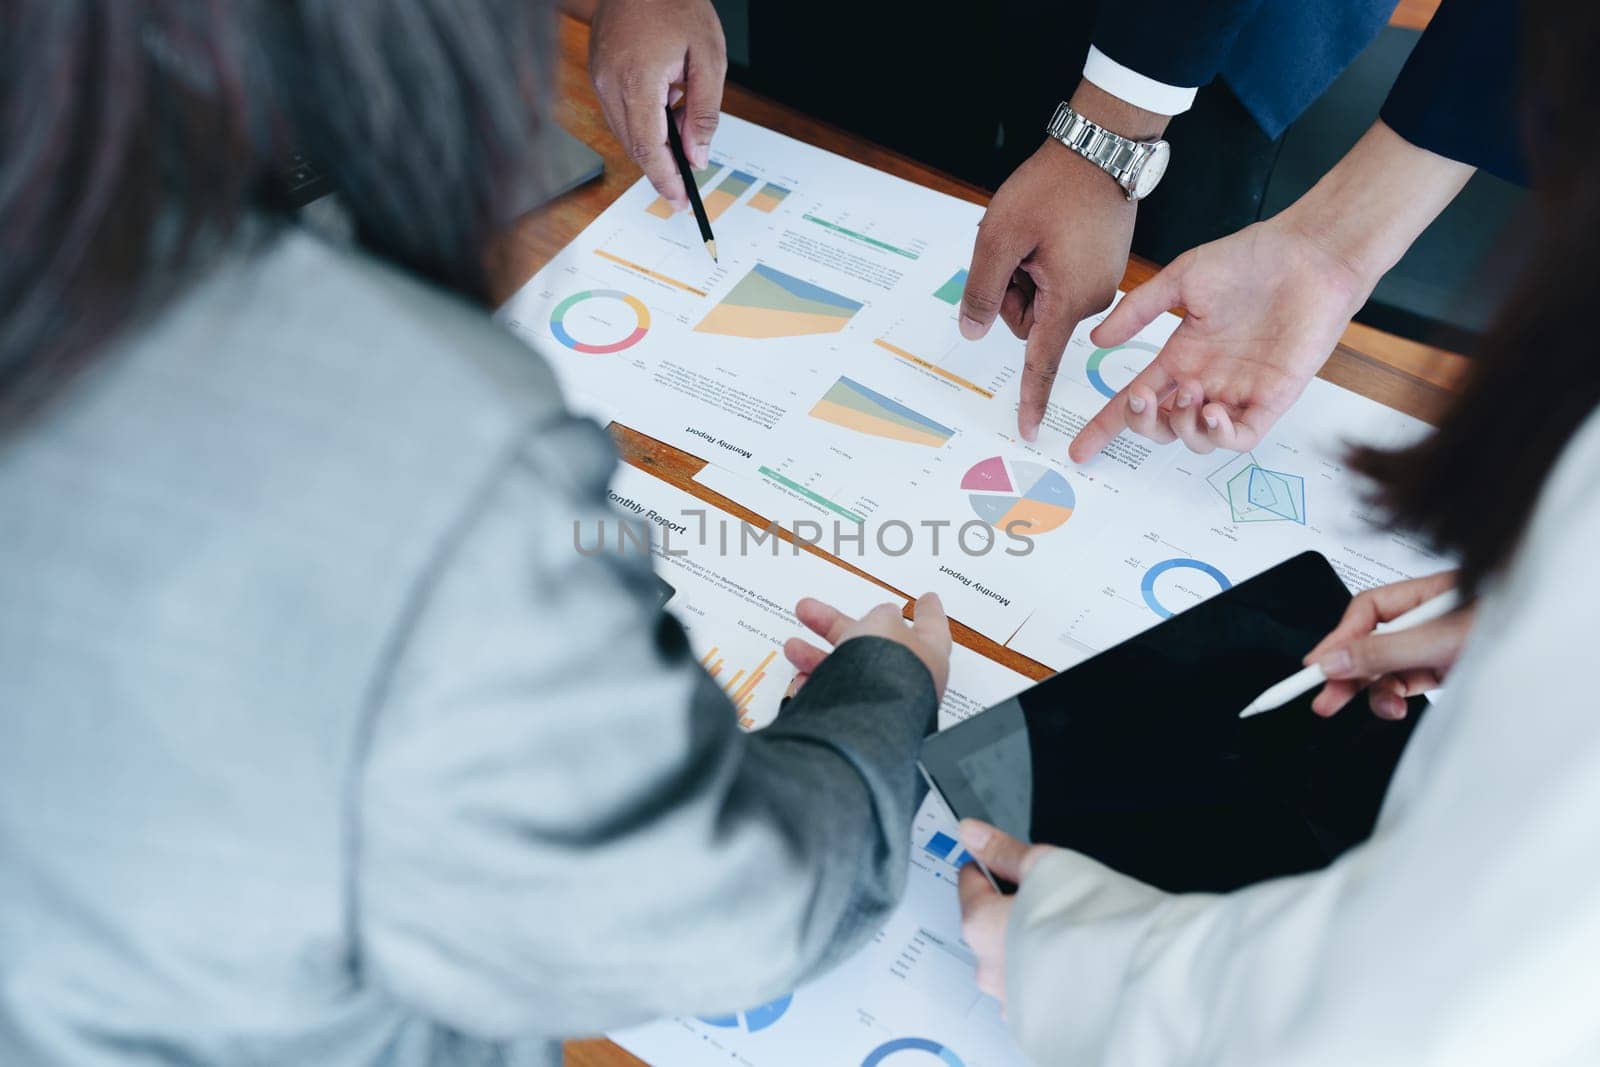 The company's businessmen meet and discuss to plan a marketing strategy and come to a conclusion on how to use the financial budget to avoid investment risks by Manastrong